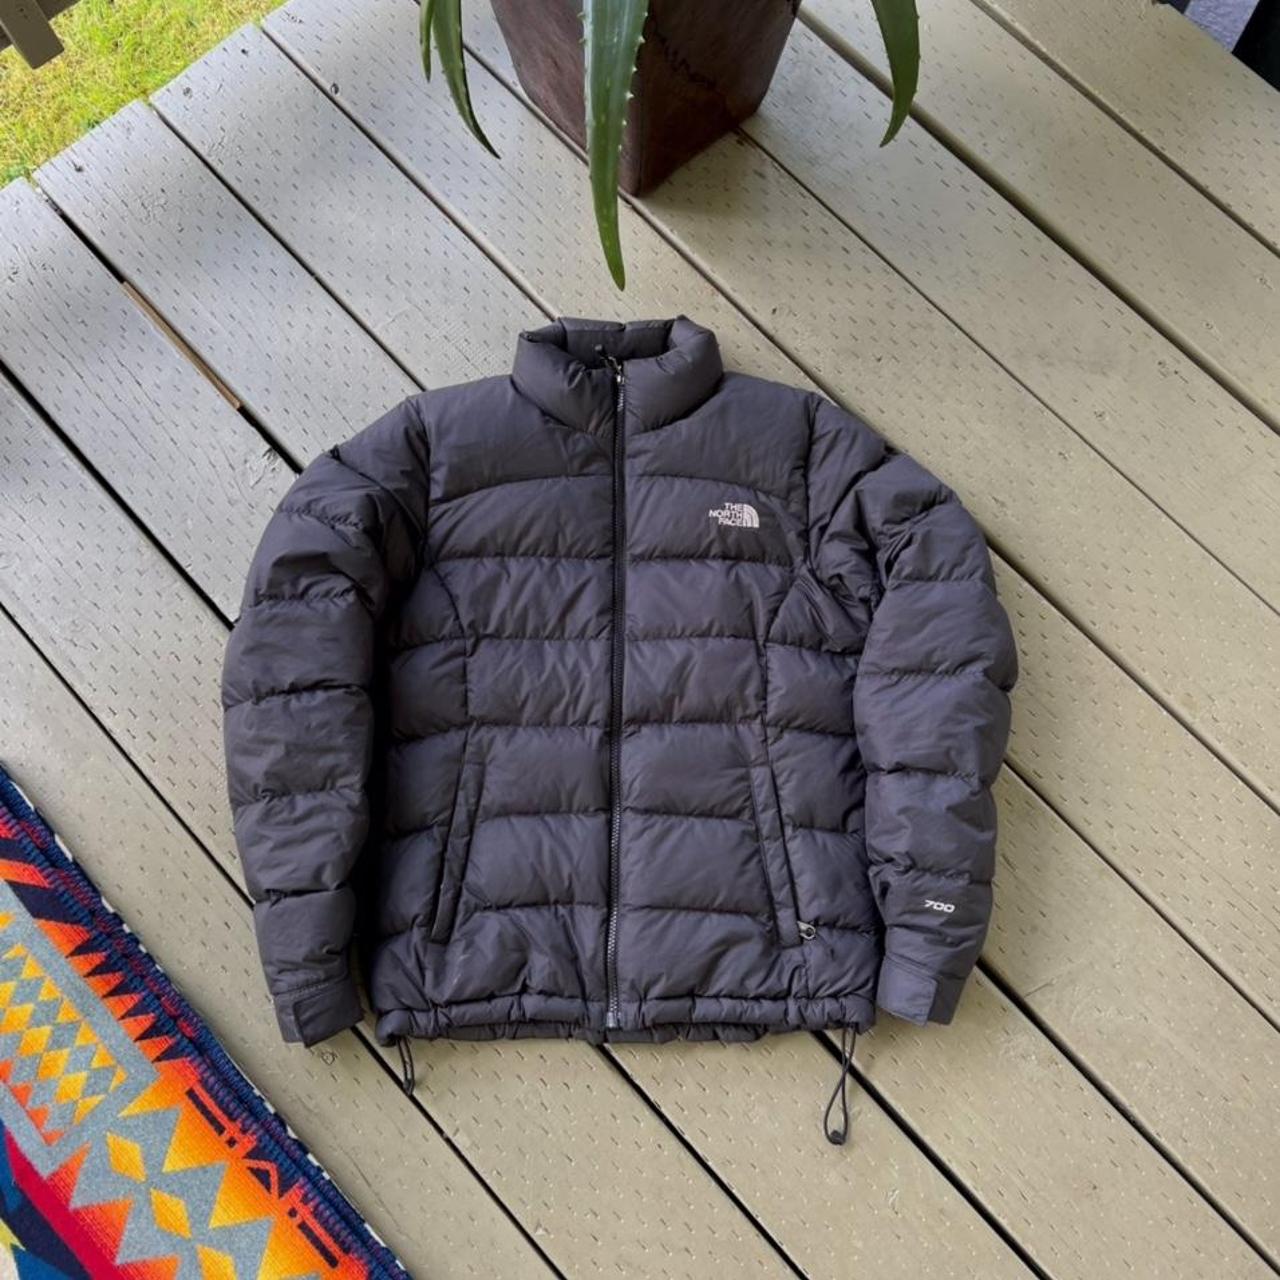 Product Image 1 - black north face puffer 700

North